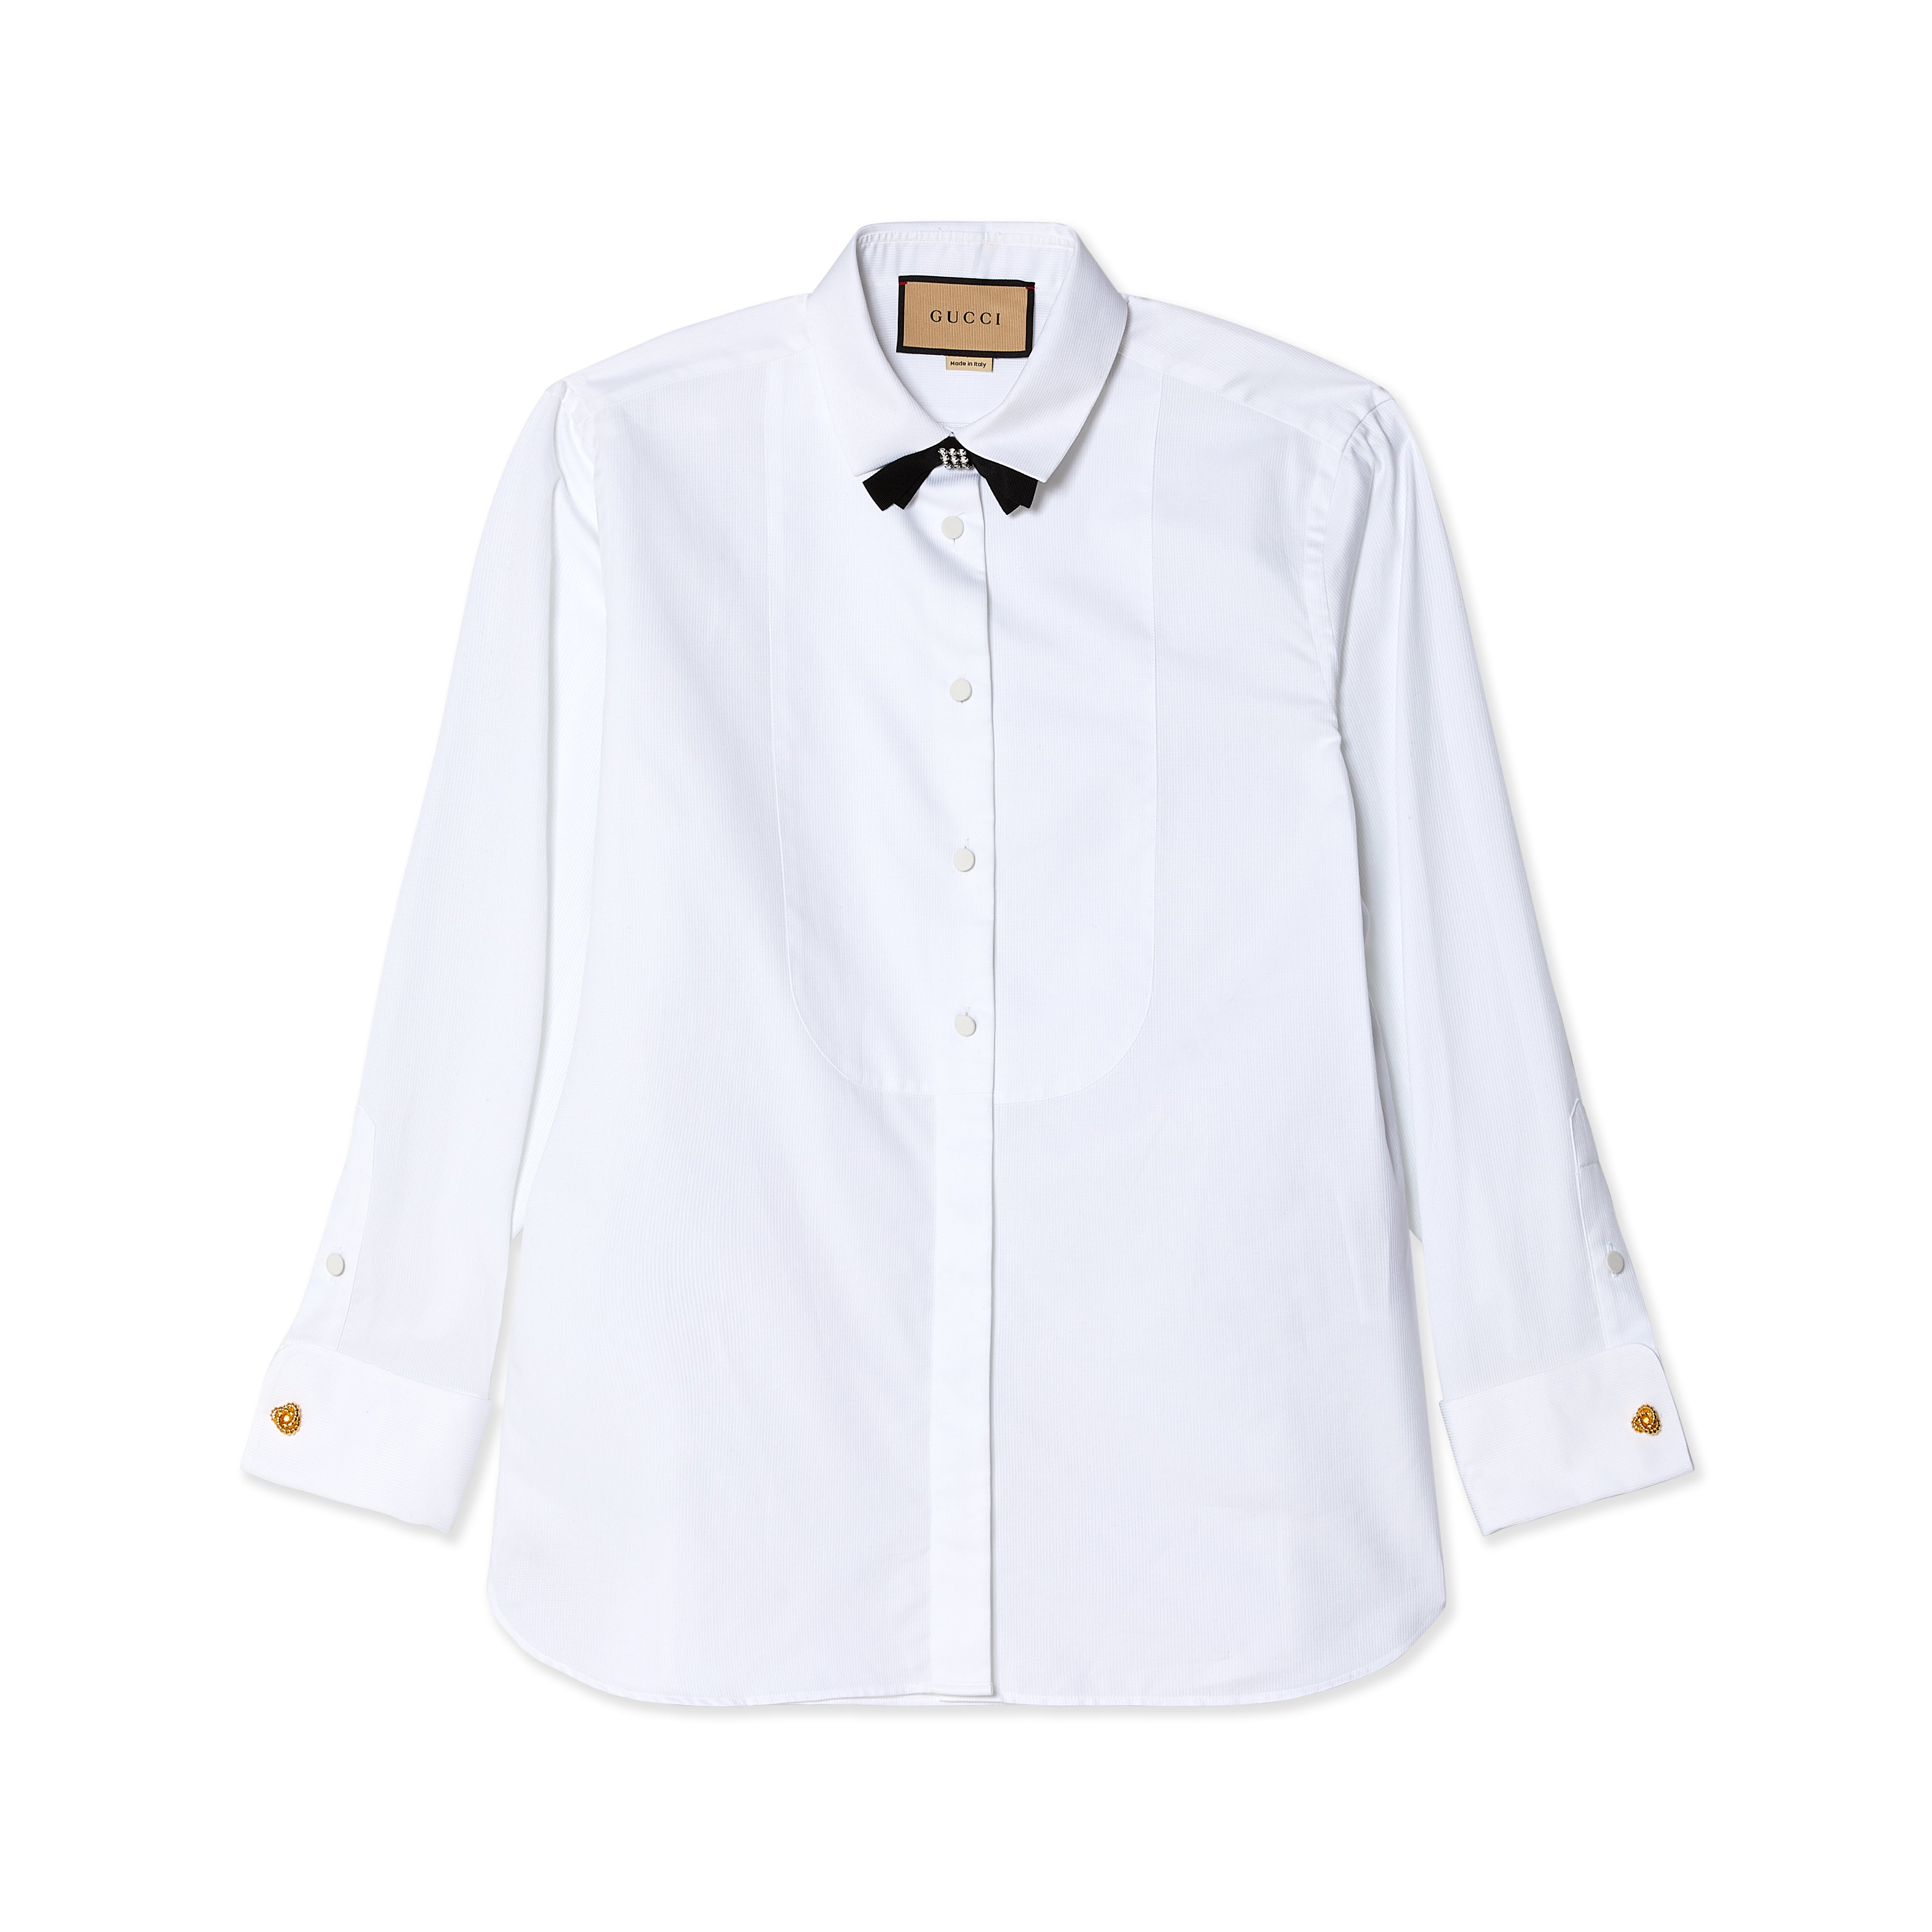 Gucci - Women's Cotton Shirt with Crystal Bow - (White) – DSMNY E-SHOP